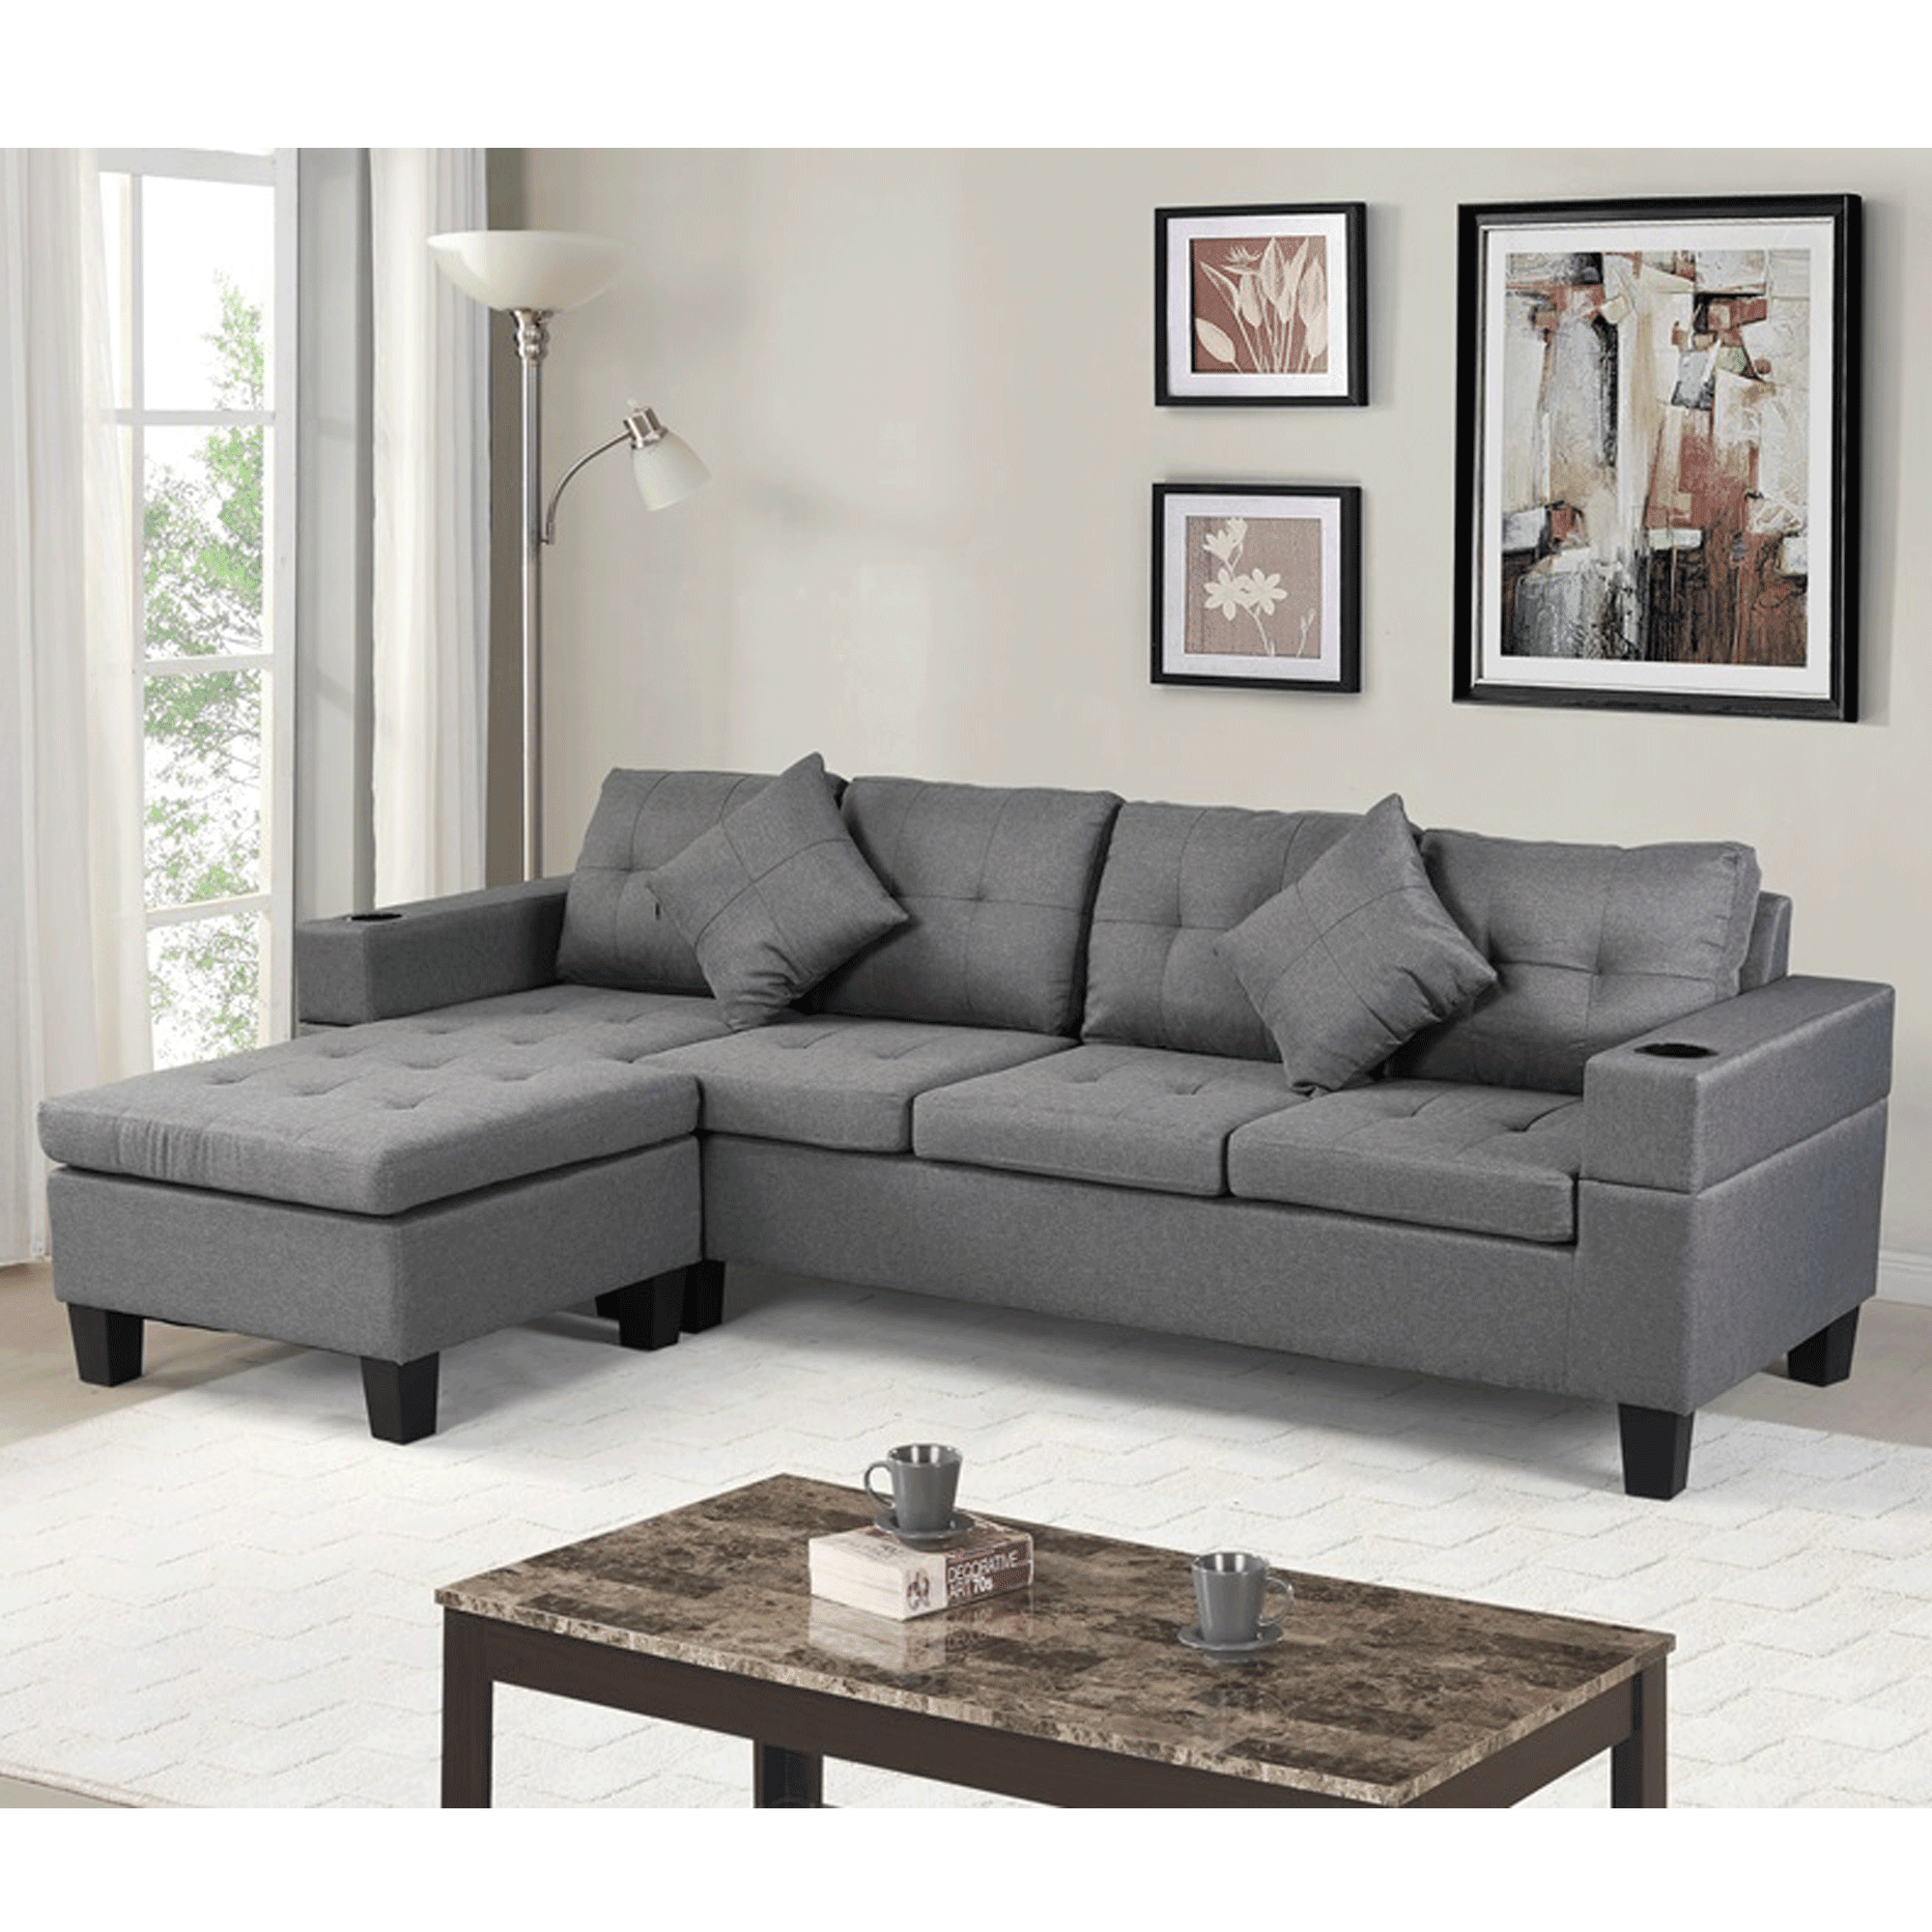 Gray 3 Pcs Sofa Set Living Room Furniture Reversible Sectional Sofa Sleeper with Storage Cup Holders Sofa Bed Home Furniture